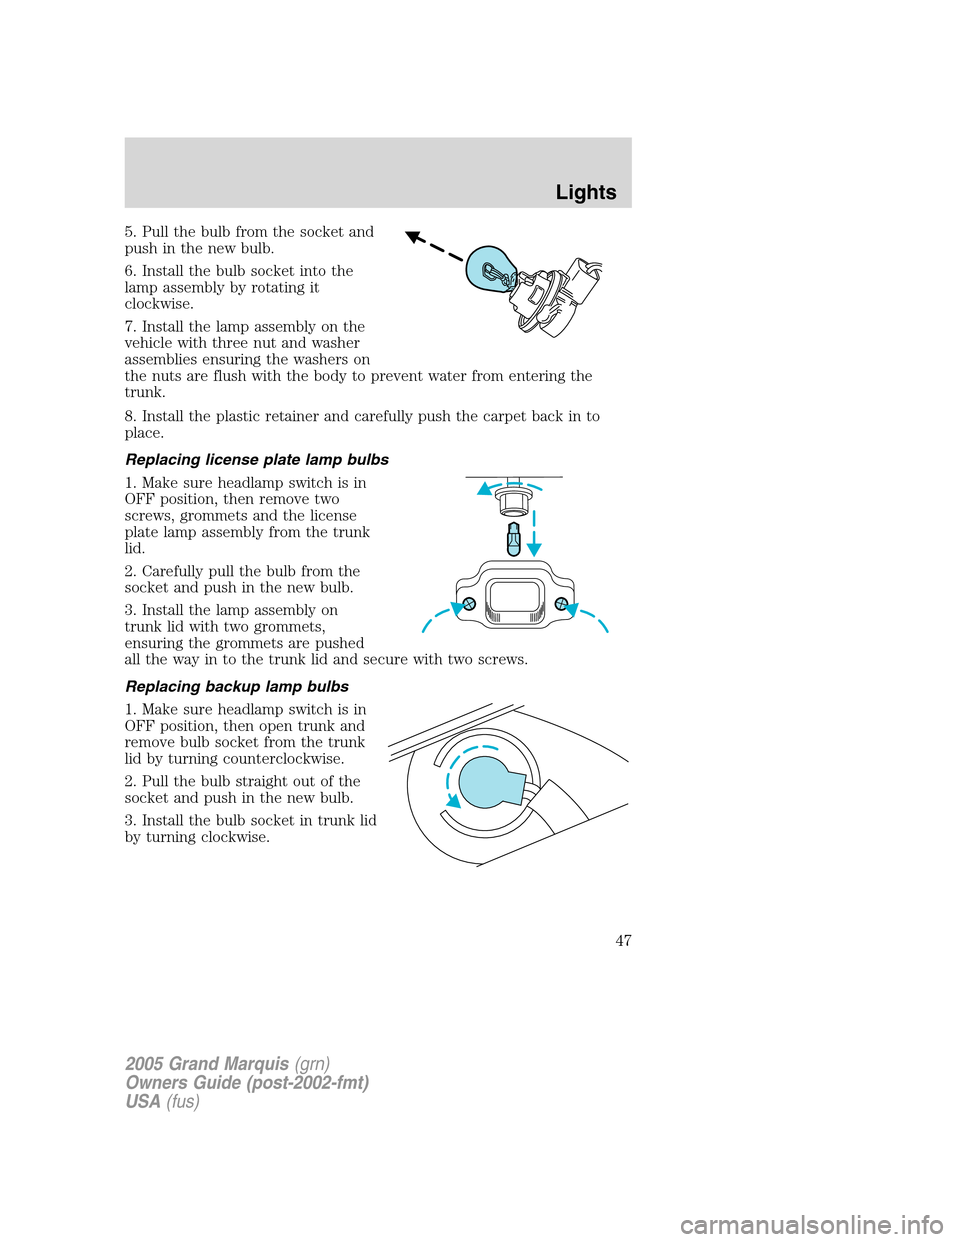 Mercury Grand Marquis 2005  s Service Manual 5. Pull the bulb from the socket and
push in the new bulb.
6. Install the bulb socket into the
lamp assembly by rotating it
clockwise.
7. Install the lamp assembly on the
vehicle with three nut and wa